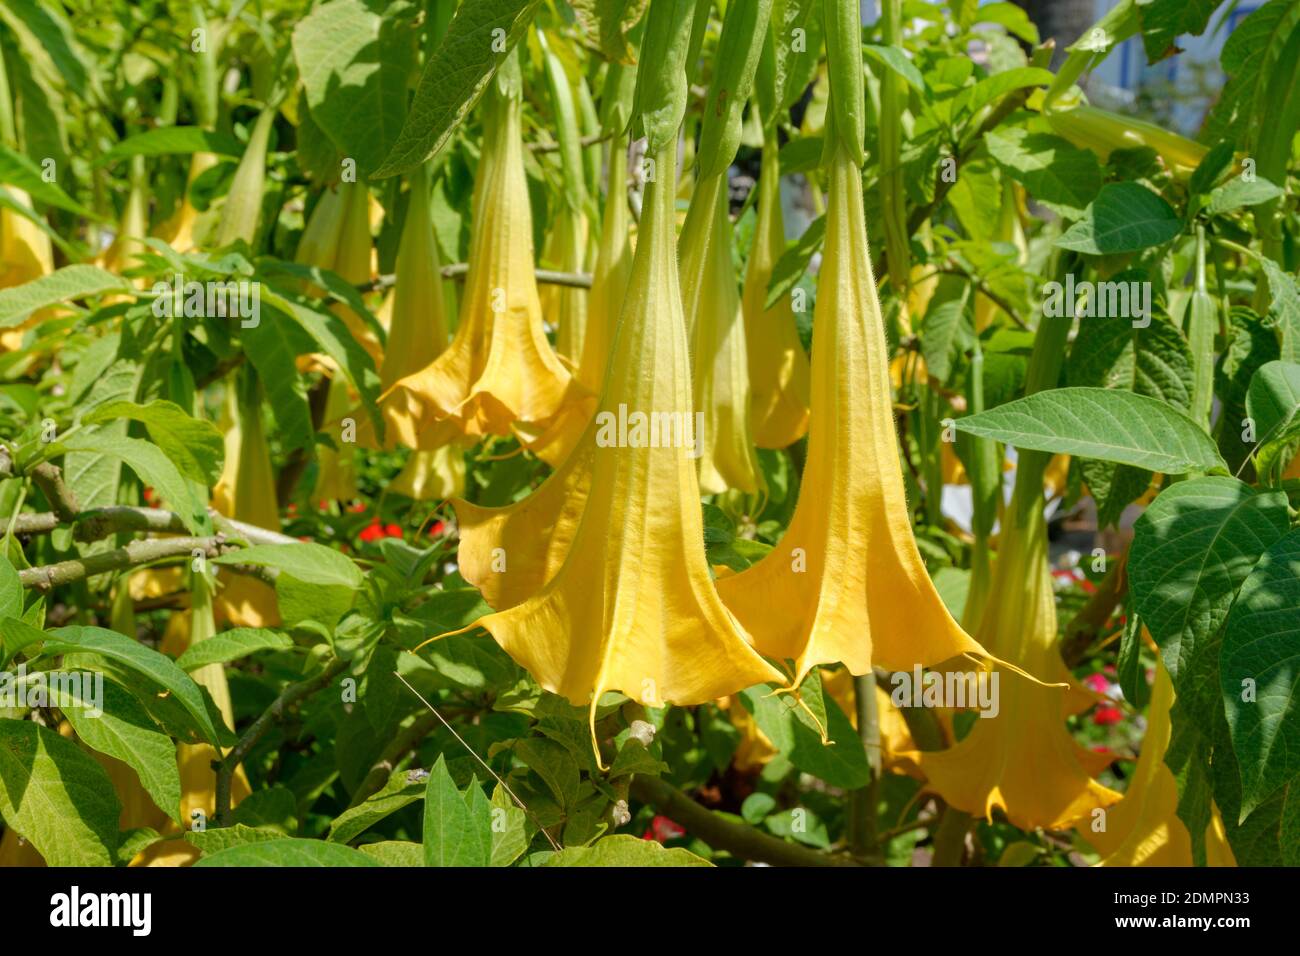 Angel's Trumpet or Brugmansia flowers. Stock Photo